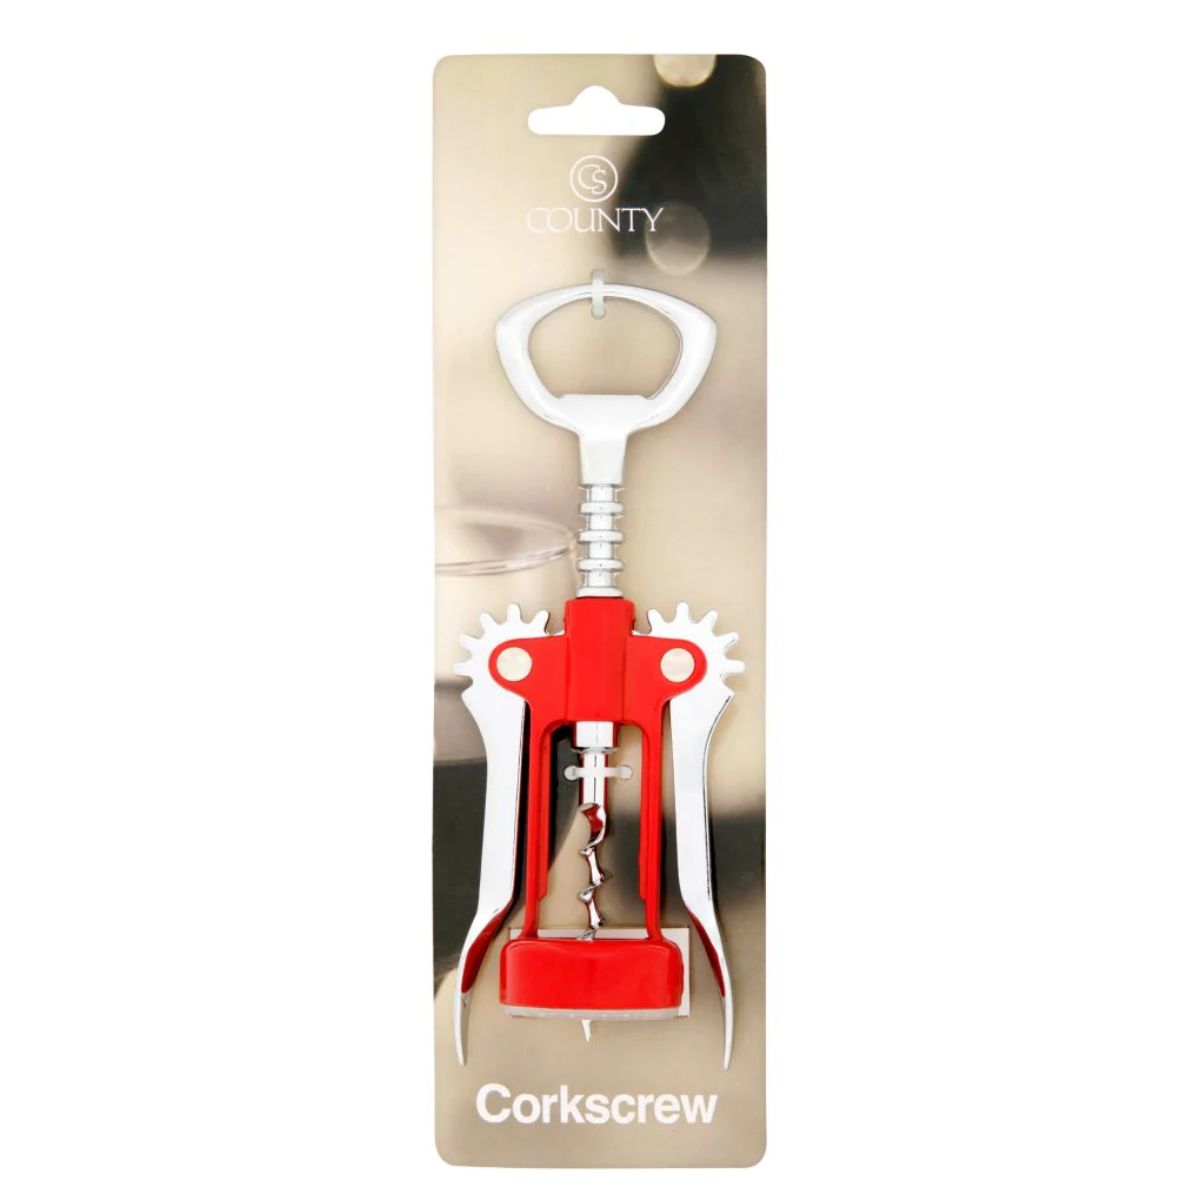 County - Lever Arm Corkscrew - 1pcs in a package.